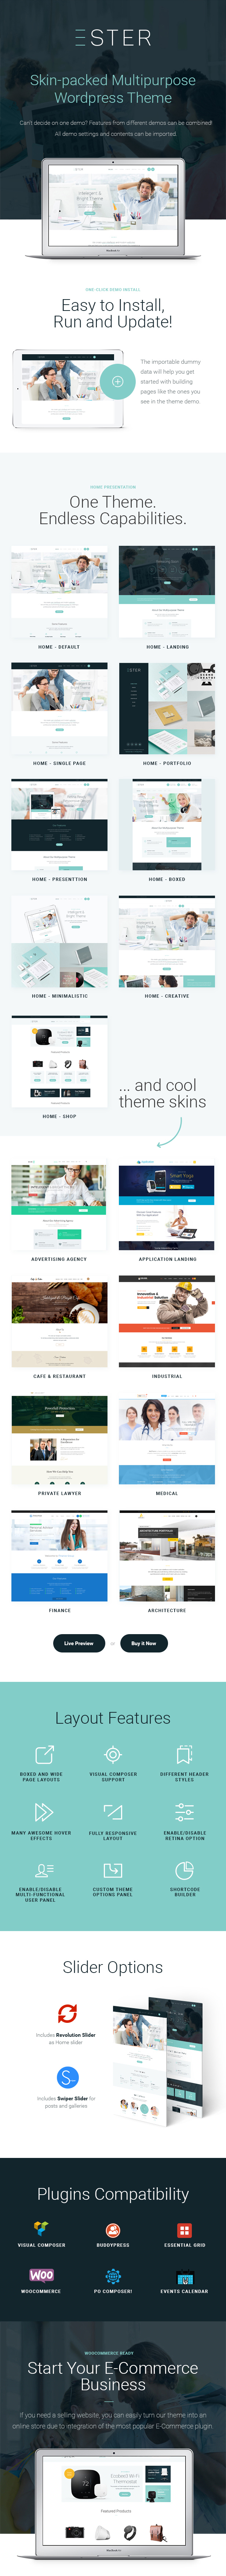 Business WordPress Theme Features